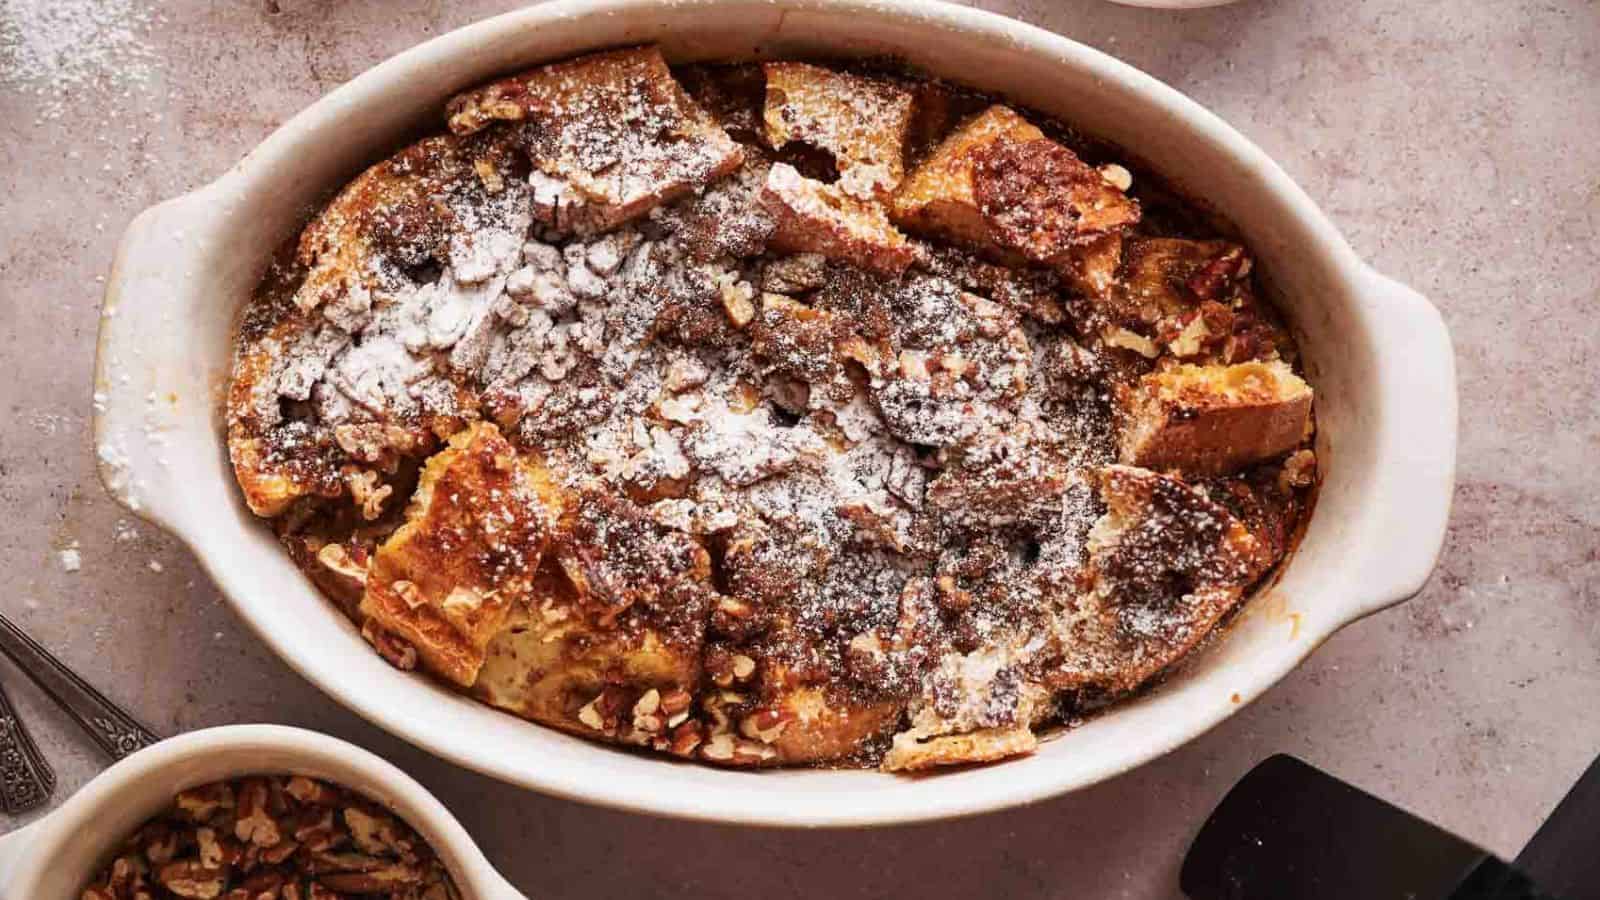 A dish of French toast with pecans and powdered sugar.